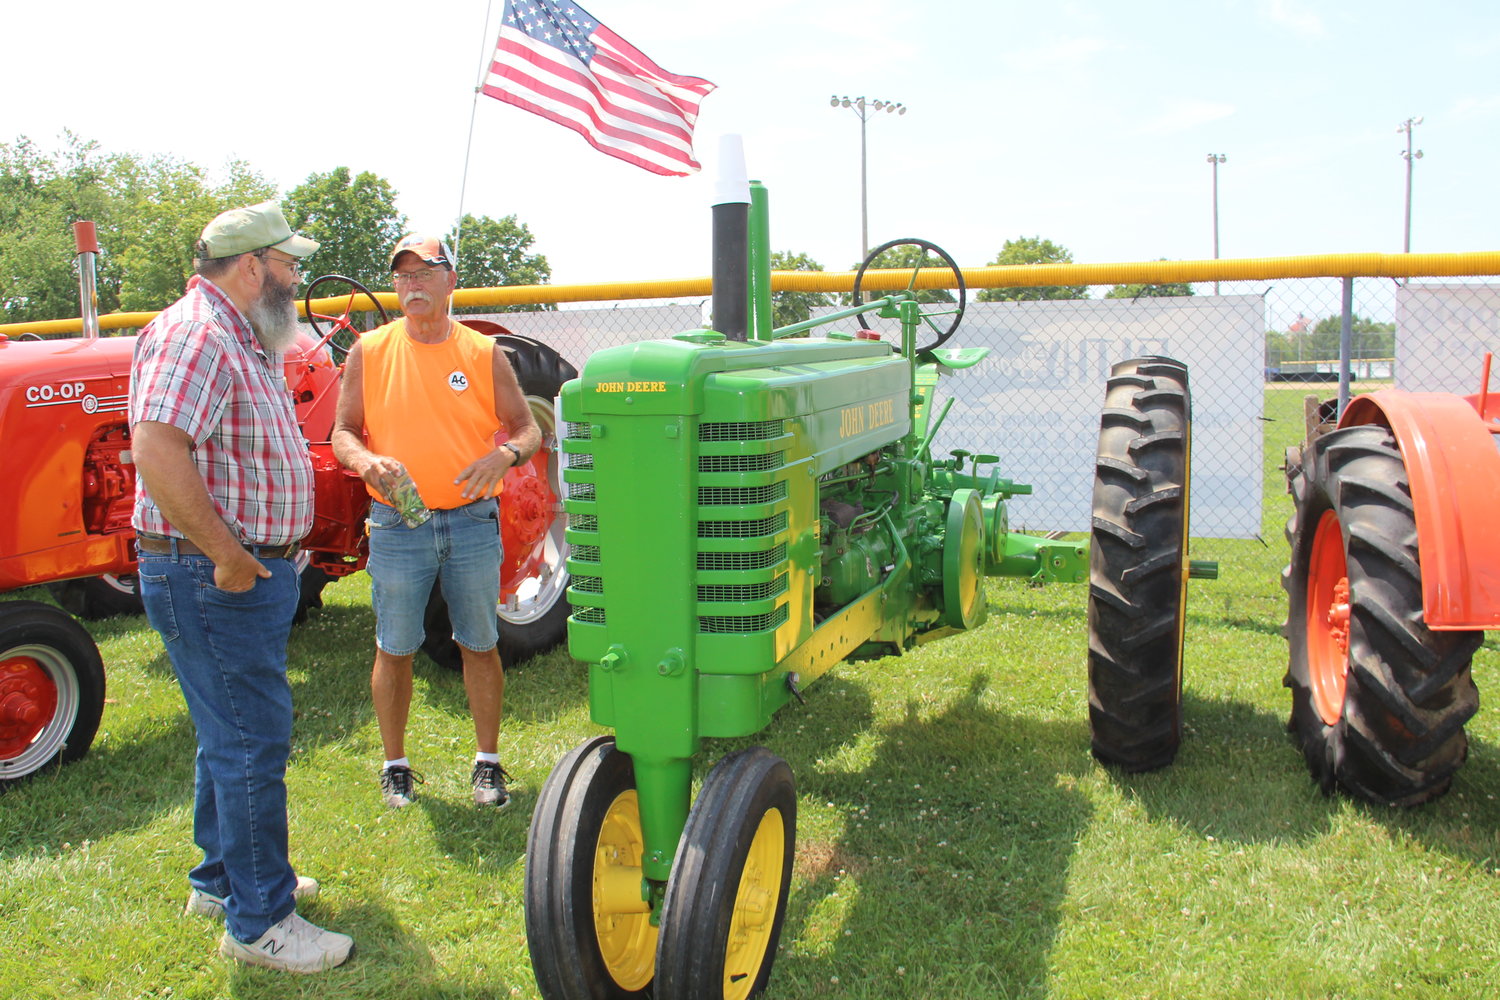 Vintage machines of all sizes were on display at the 2021 Old Threshers. [Nathan Lilley Photo]